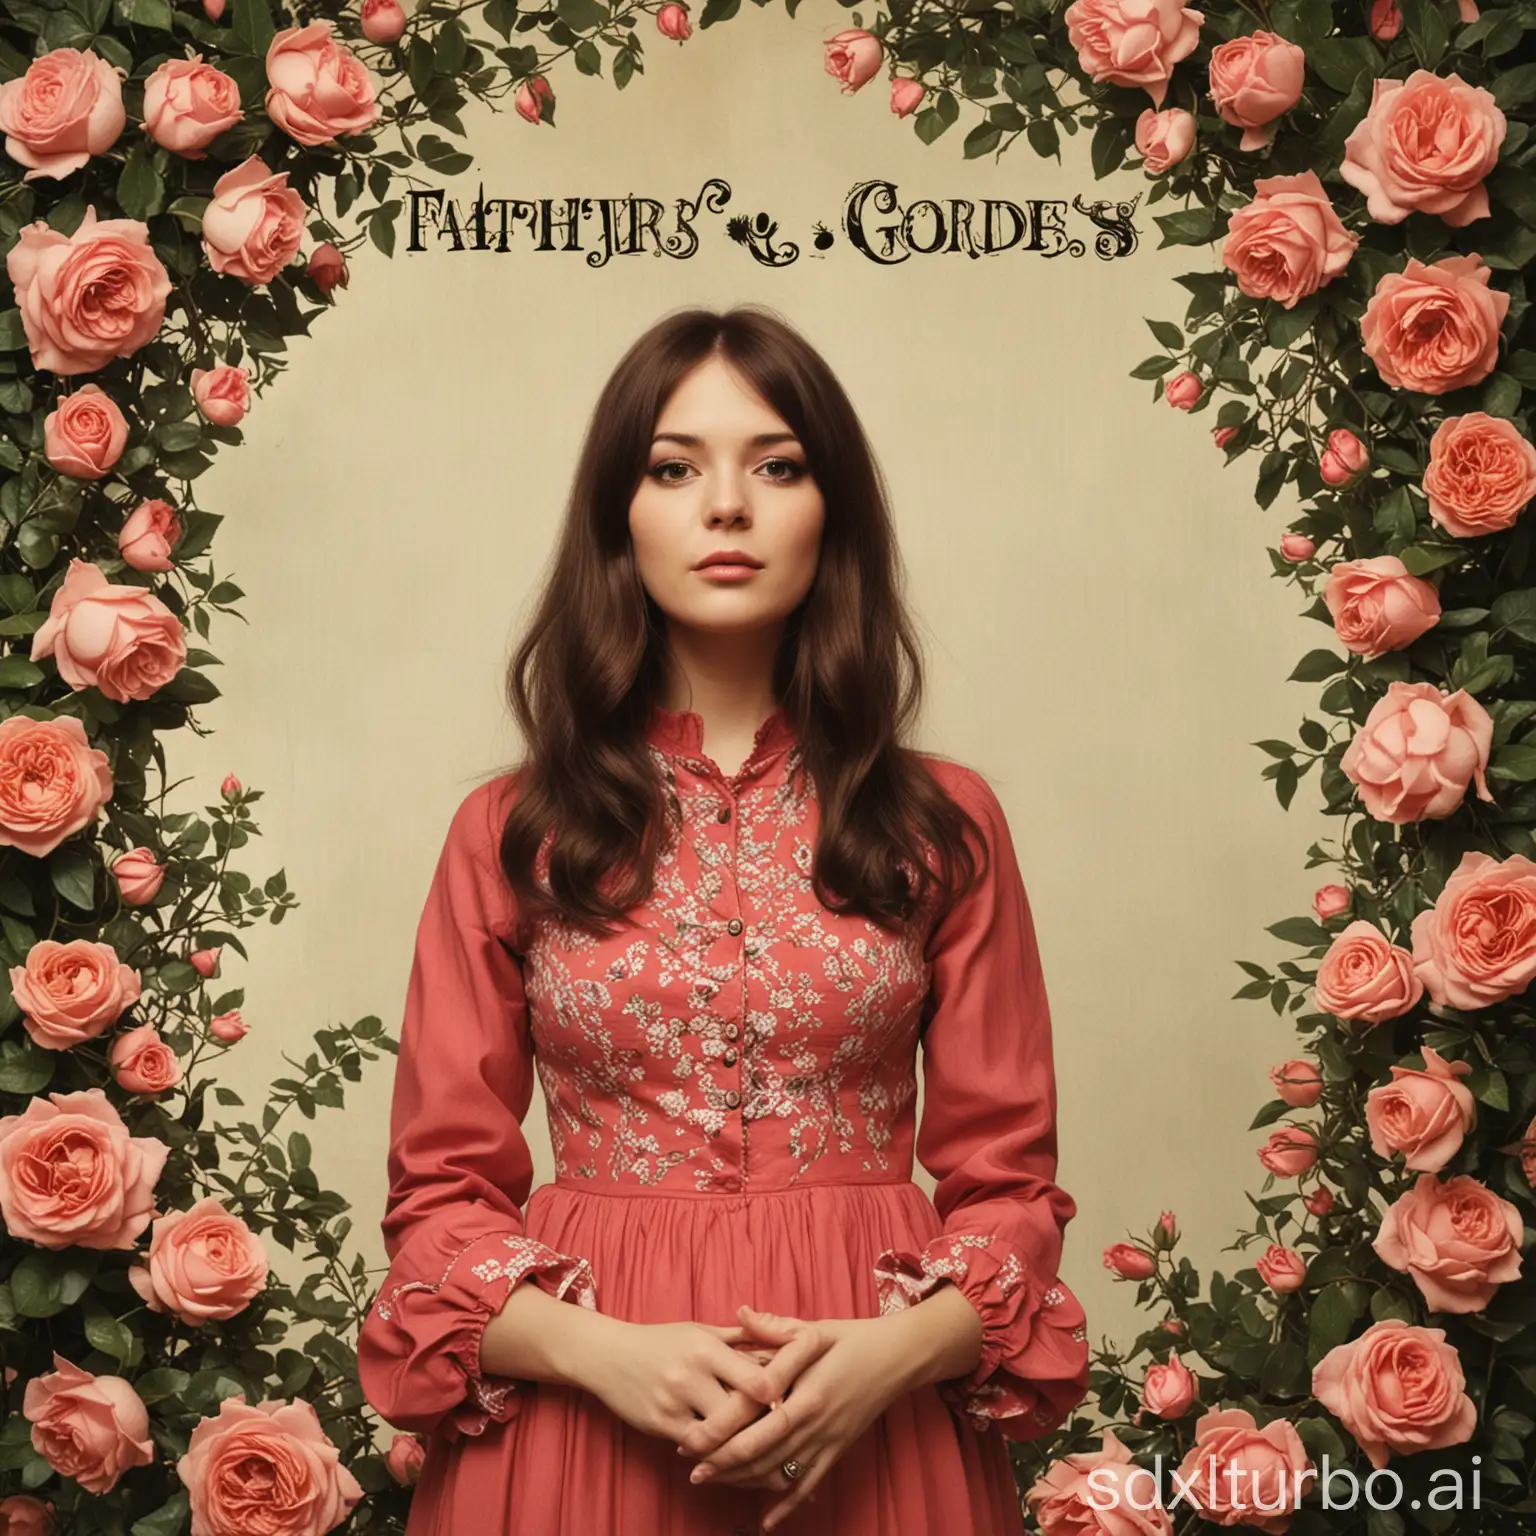 "Father's Garden Roses", girl, father, cover, 1960s, Sunshine pop, Folk, Baroque pop, Adult contemporary, Melodic, Folk rock, Soft rock, Warm